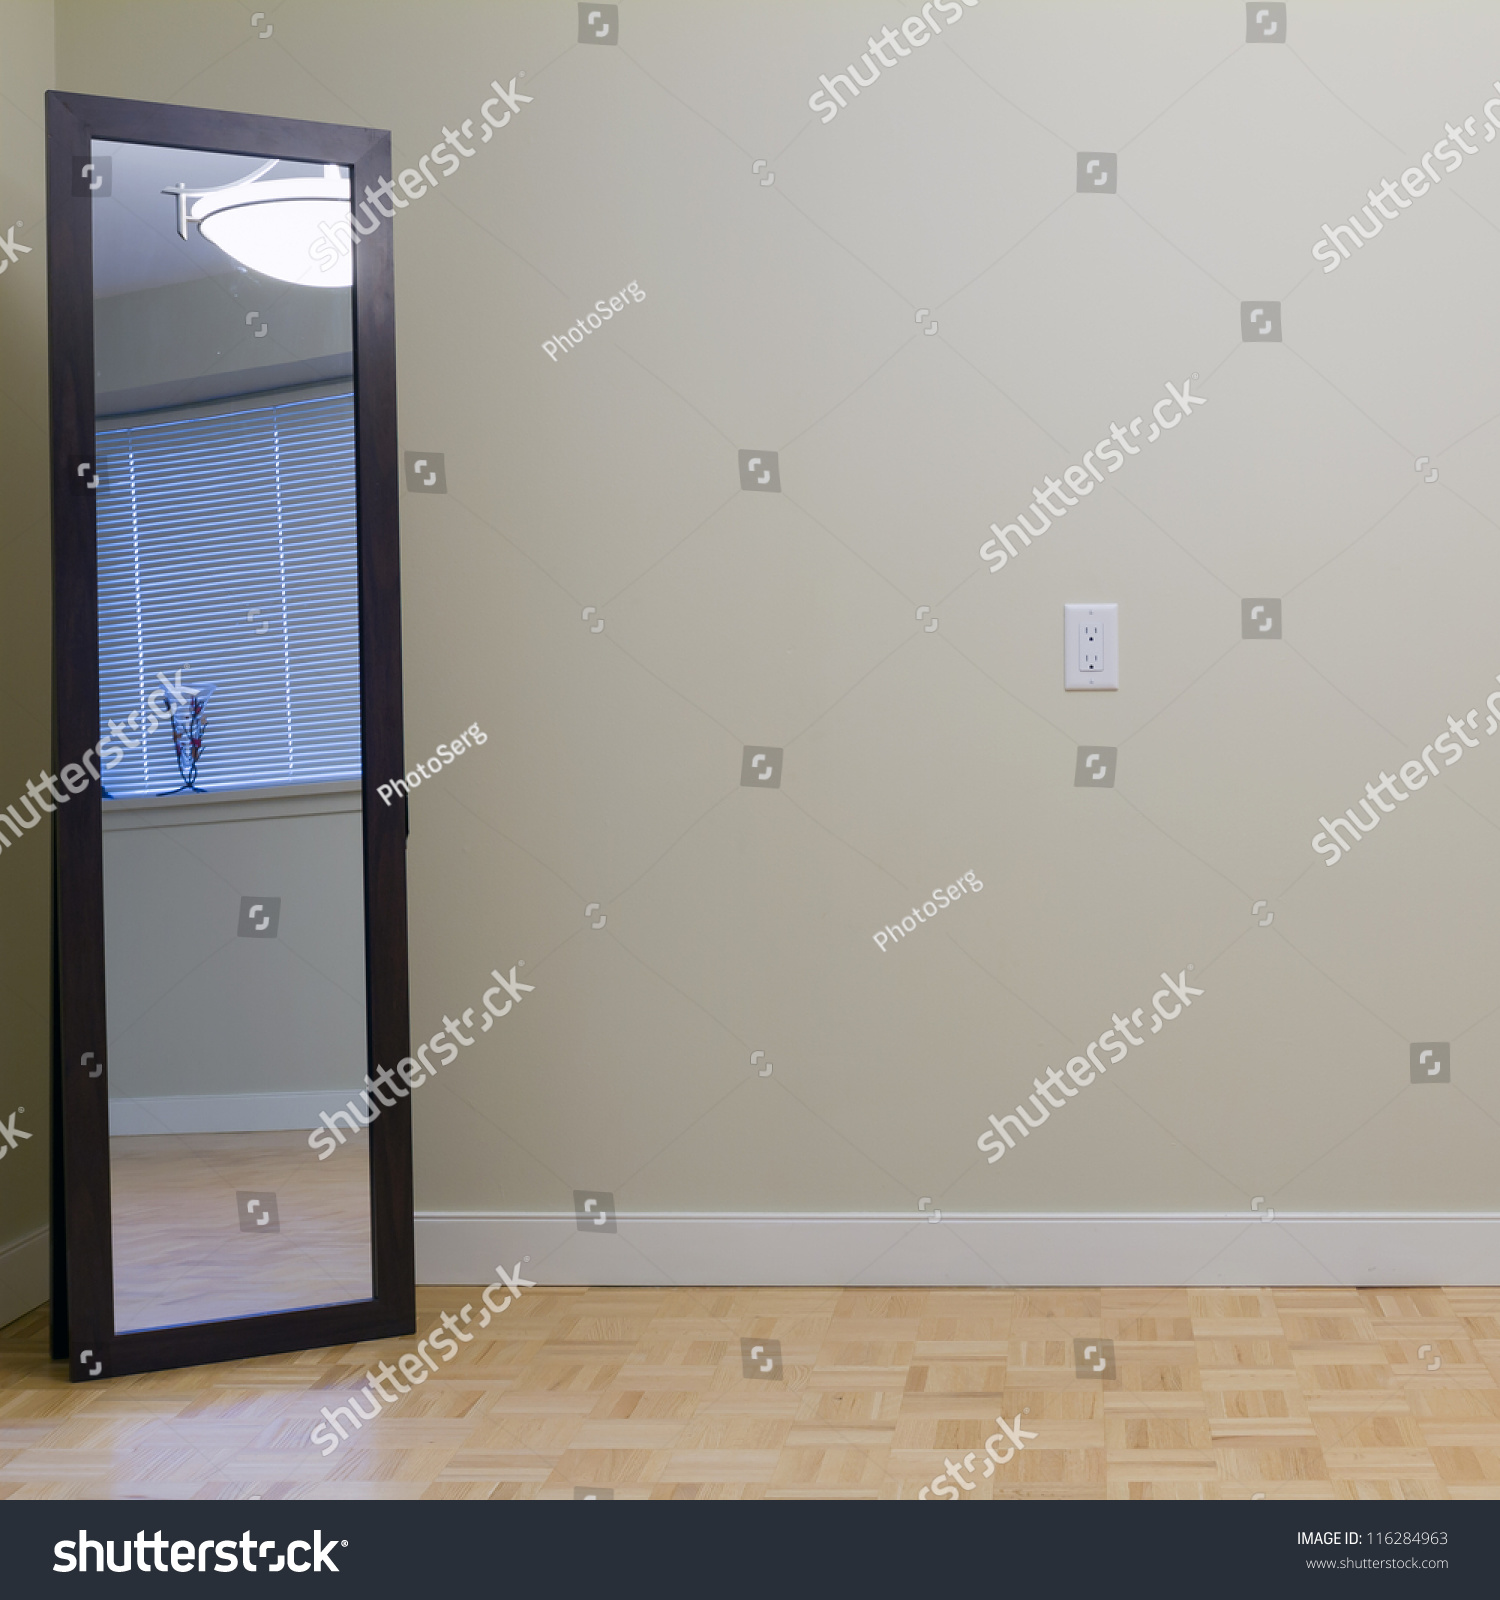 Empty Living Room With Mirror In A New Apartment Stock ...
